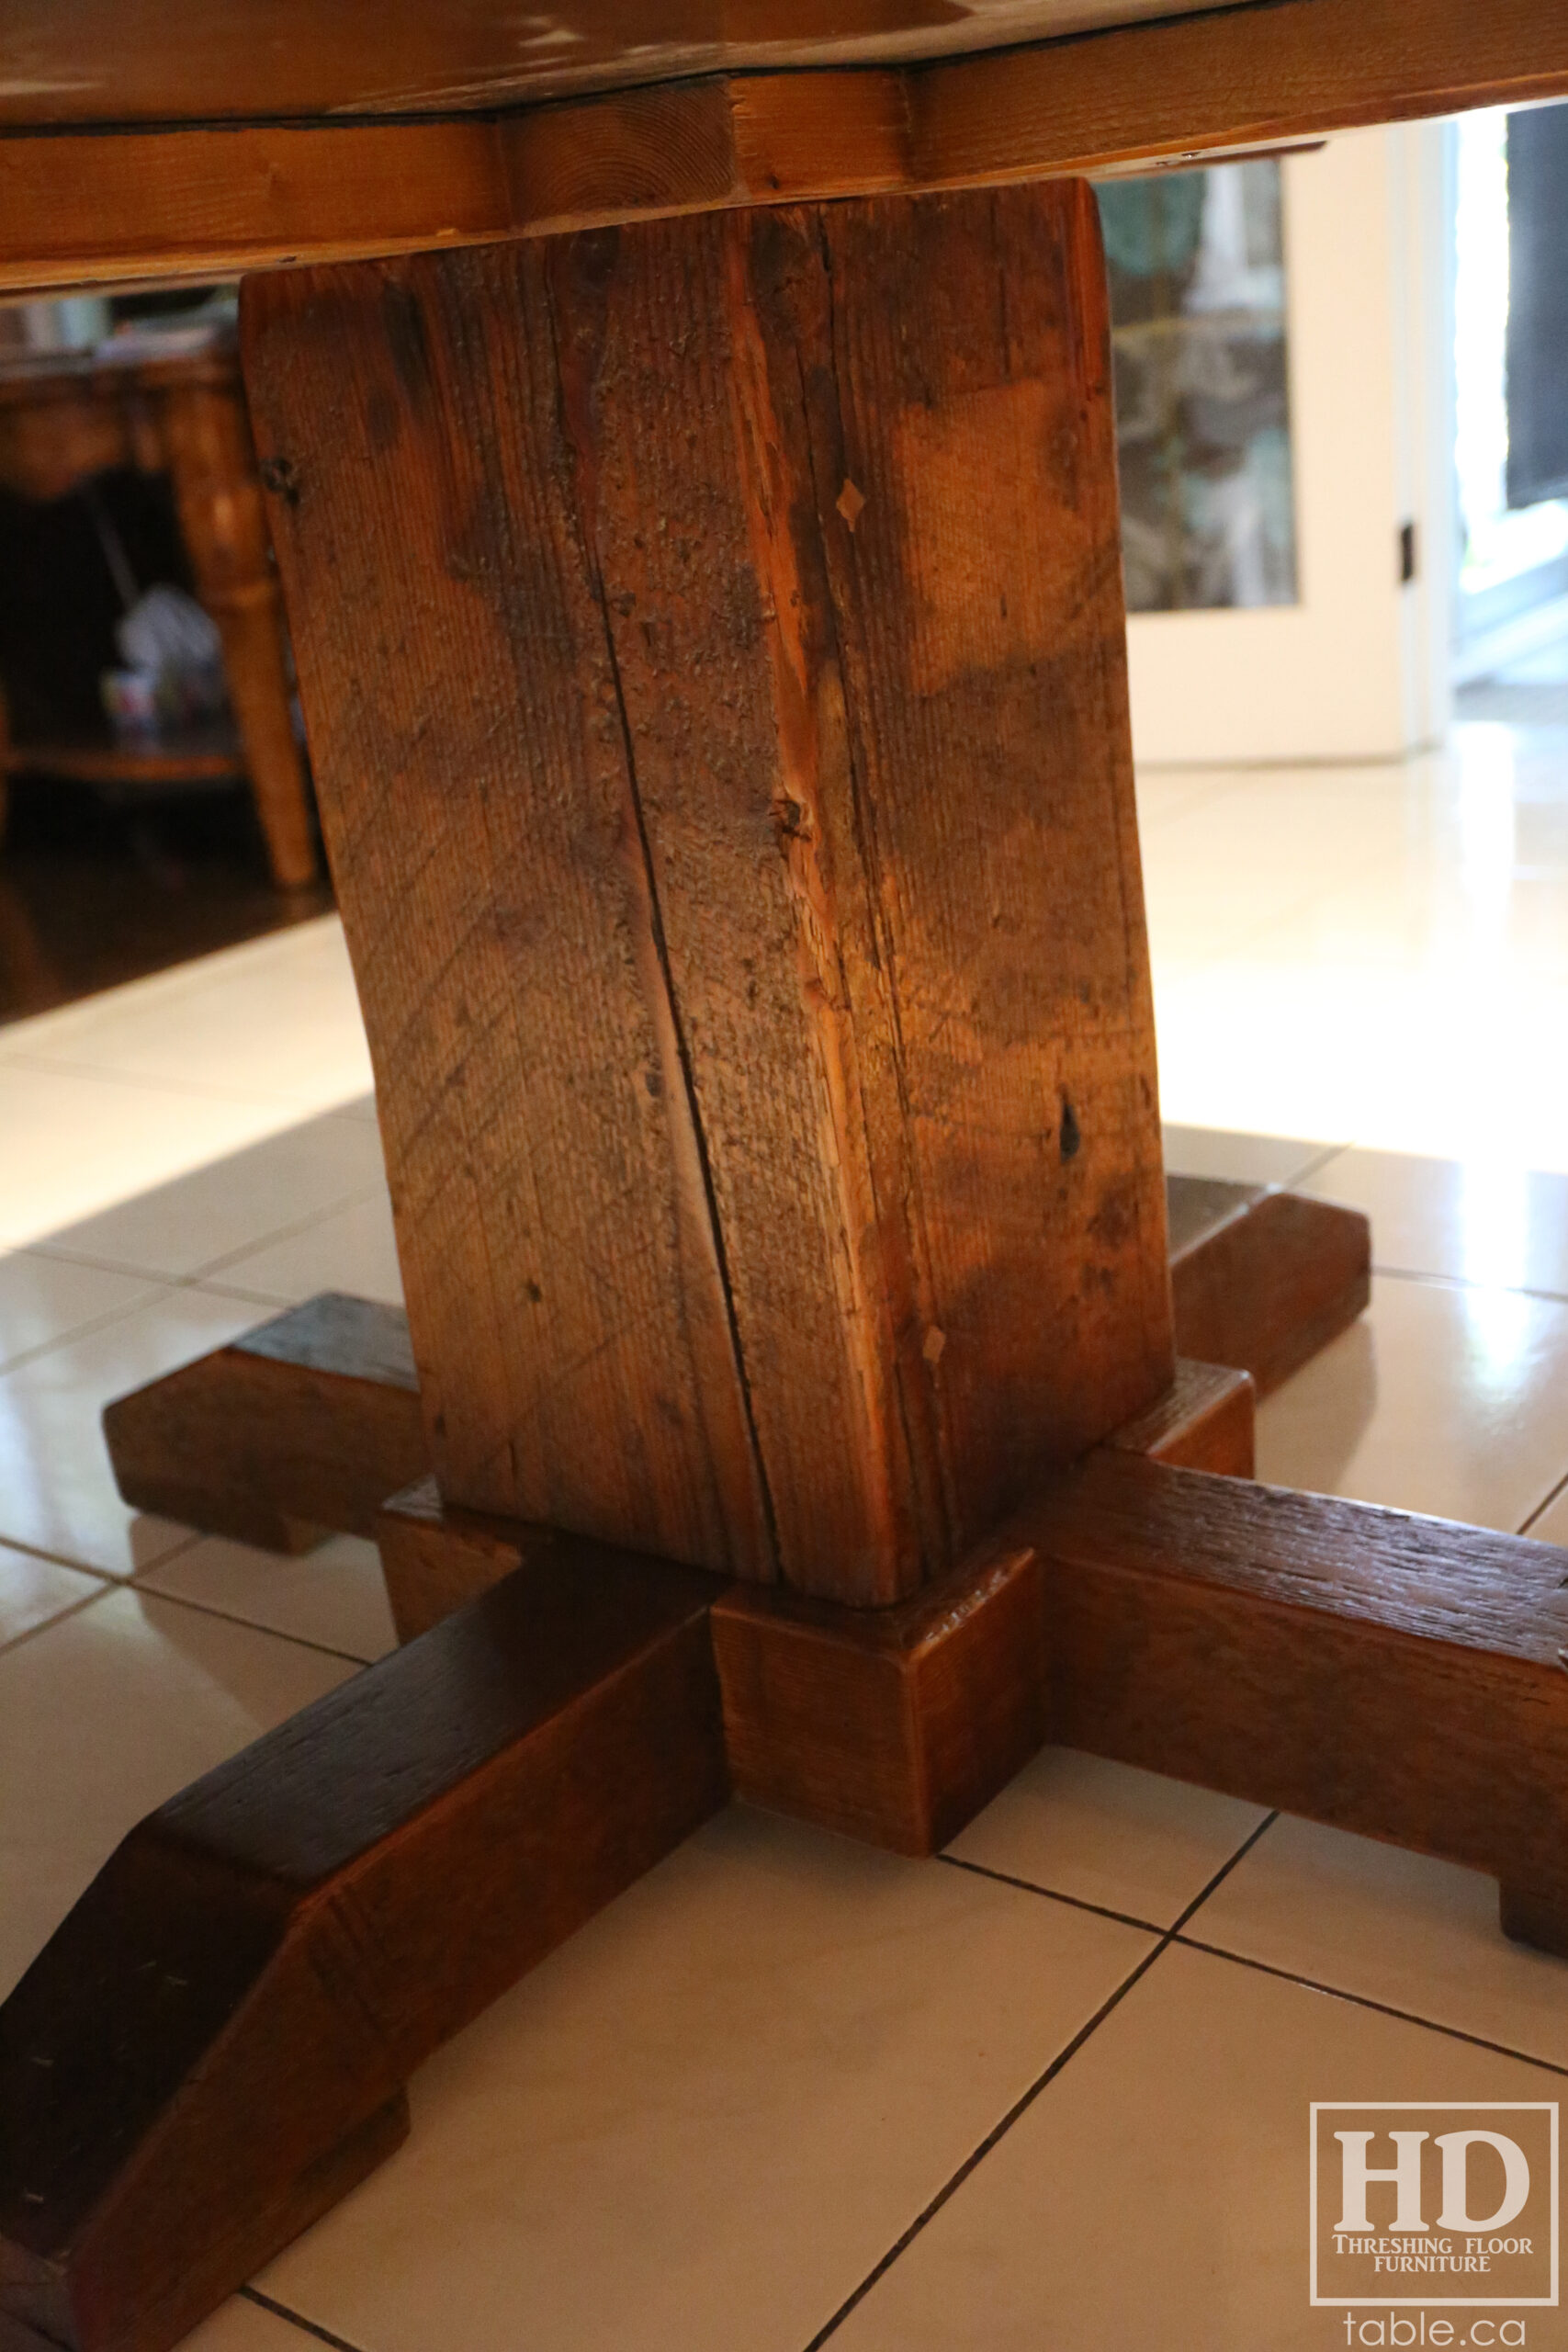 Reclaimed Wood Pedestal Kitchen Table by HD Threshing Floor Furniture / www.table.ca